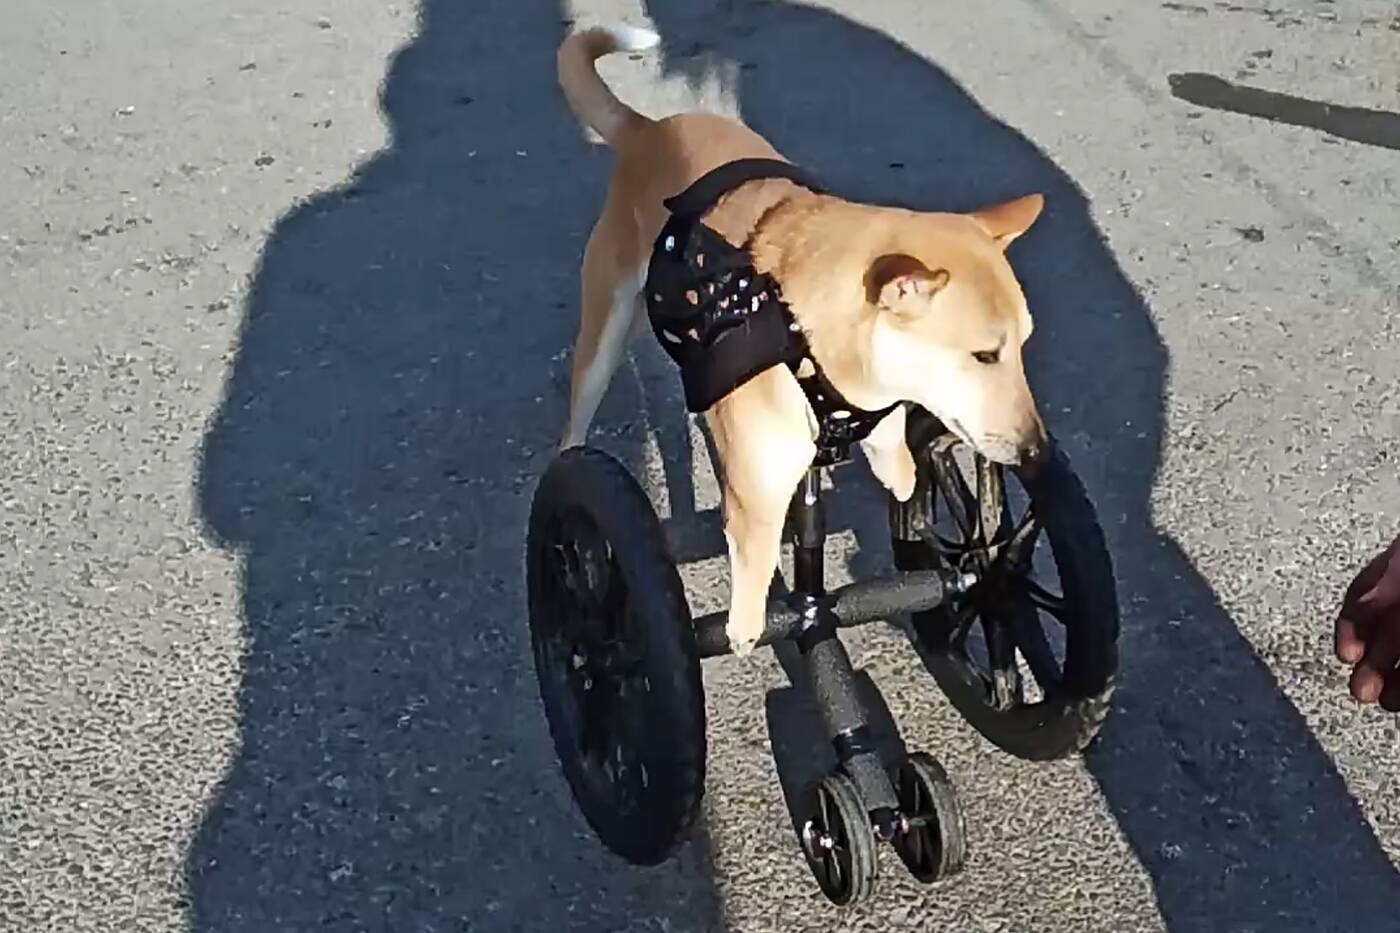 Toronto mechanic makes a cart for a dog with amputated front legs